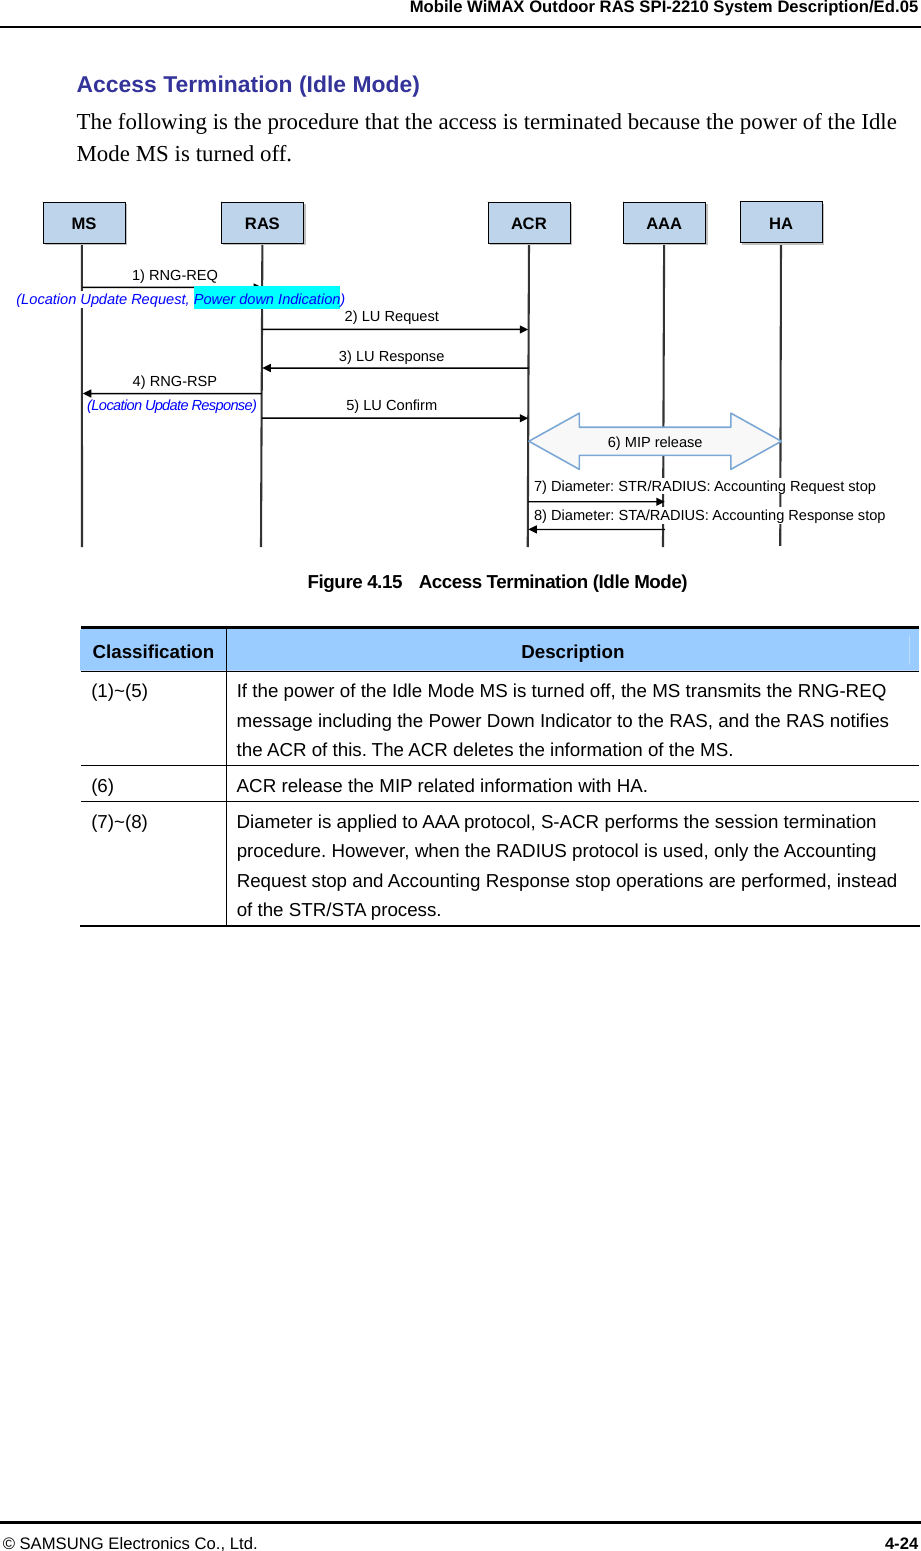   Mobile WiMAX Outdoor RAS SPI-2210 System Description/Ed.05 © SAMSUNG Electronics Co., Ltd.  4-24 Access Termination (Idle Mode) The following is the procedure that the access is terminated because the power of the Idle Mode MS is turned off.    Figure 4.15    Access Termination (Idle Mode)  Classification  Description (1)~(5)  If the power of the Idle Mode MS is turned off, the MS transmits the RNG-REQ message including the Power Down Indicator to the RAS, and the RAS notifies the ACR of this. The ACR deletes the information of the MS.   (6)  ACR release the MIP related information with HA. (7)~(8)  Diameter is applied to AAA protocol, S-ACR performs the session termination procedure. However, when the RADIUS protocol is used, only the Accounting Request stop and Accounting Response stop operations are performed, instead of the STR/STA process.  MS  RAS ACR1) RNG-REQ (Location Update Request, Power down Indication) 2) LU Request 4) RNG-RSP (Location Update Response) 3) LU Response 5) LU Confirm AAA HA 6) MIP release 7) Diameter: STR/RADIUS: Accounting Request stop 8) Diameter: STA/RADIUS: Accounting Response stop 